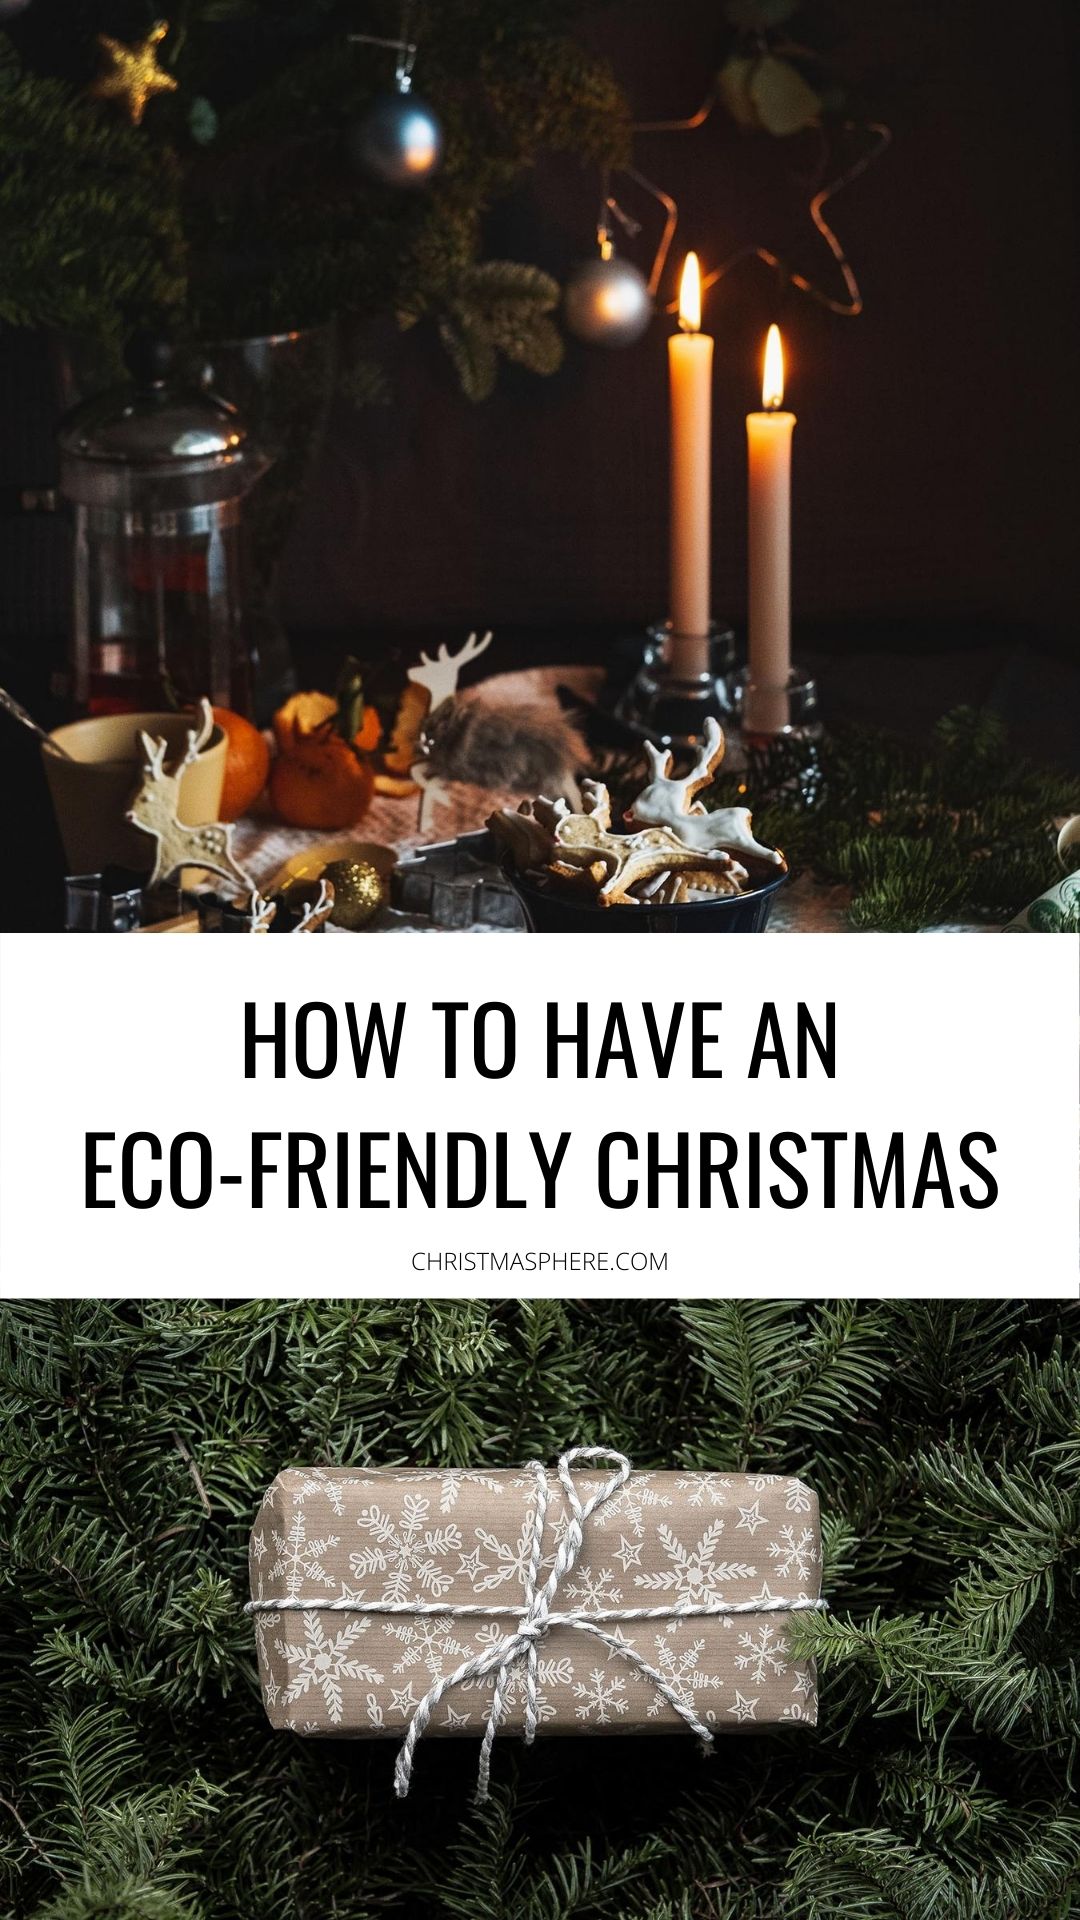 How to have an eco-friendly Christmas